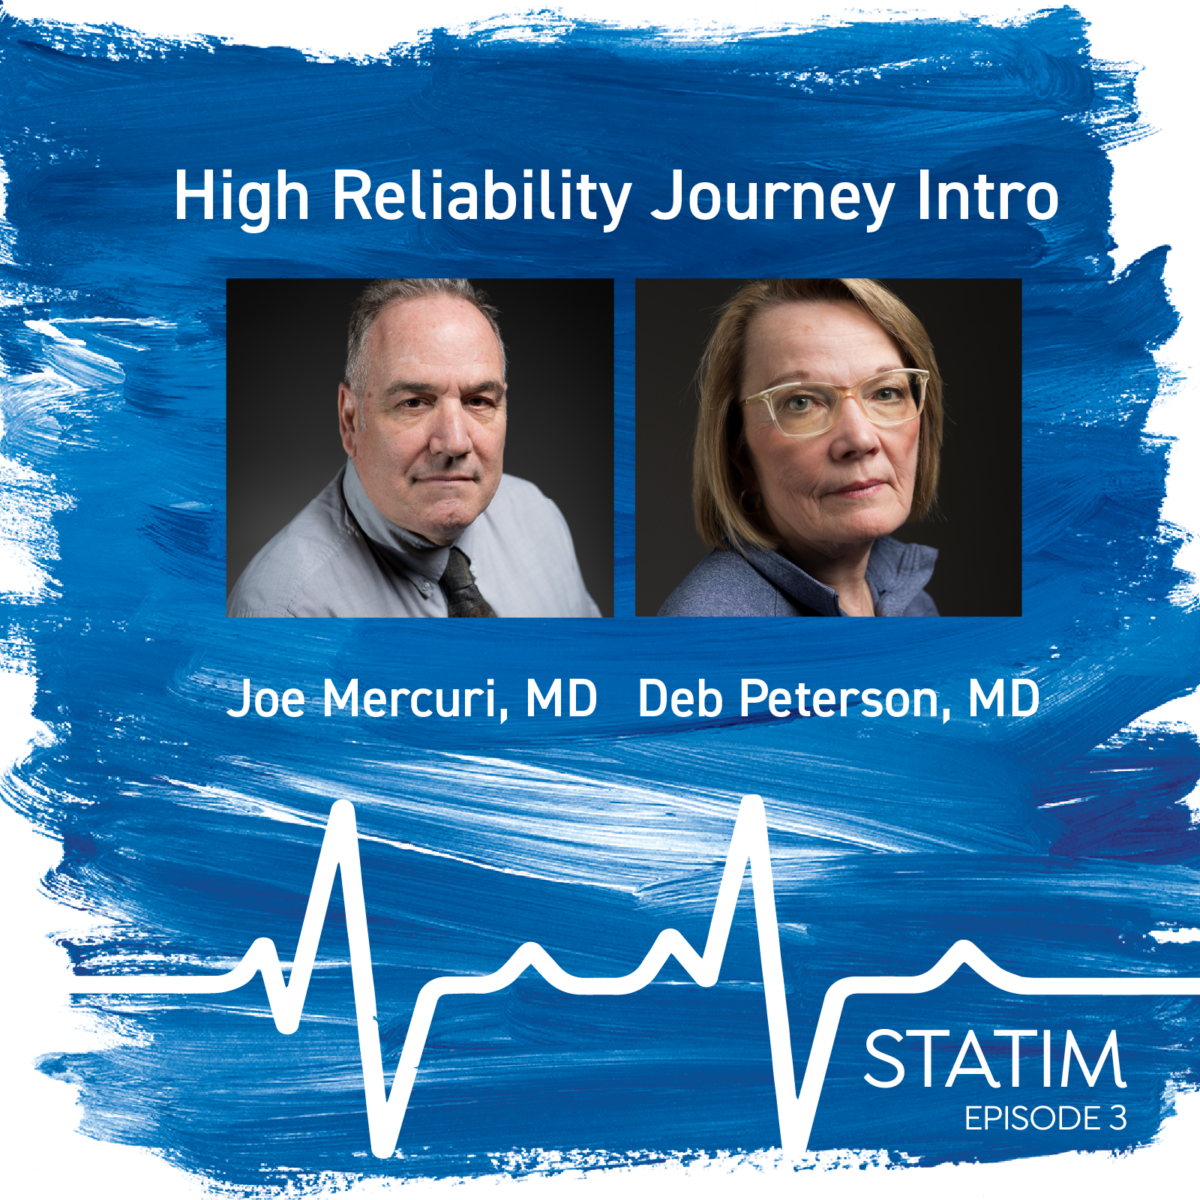 Graphic promotion for STATIM episode three with Drs. Joe Mercuri and Deb Peterson on The HRO Journey